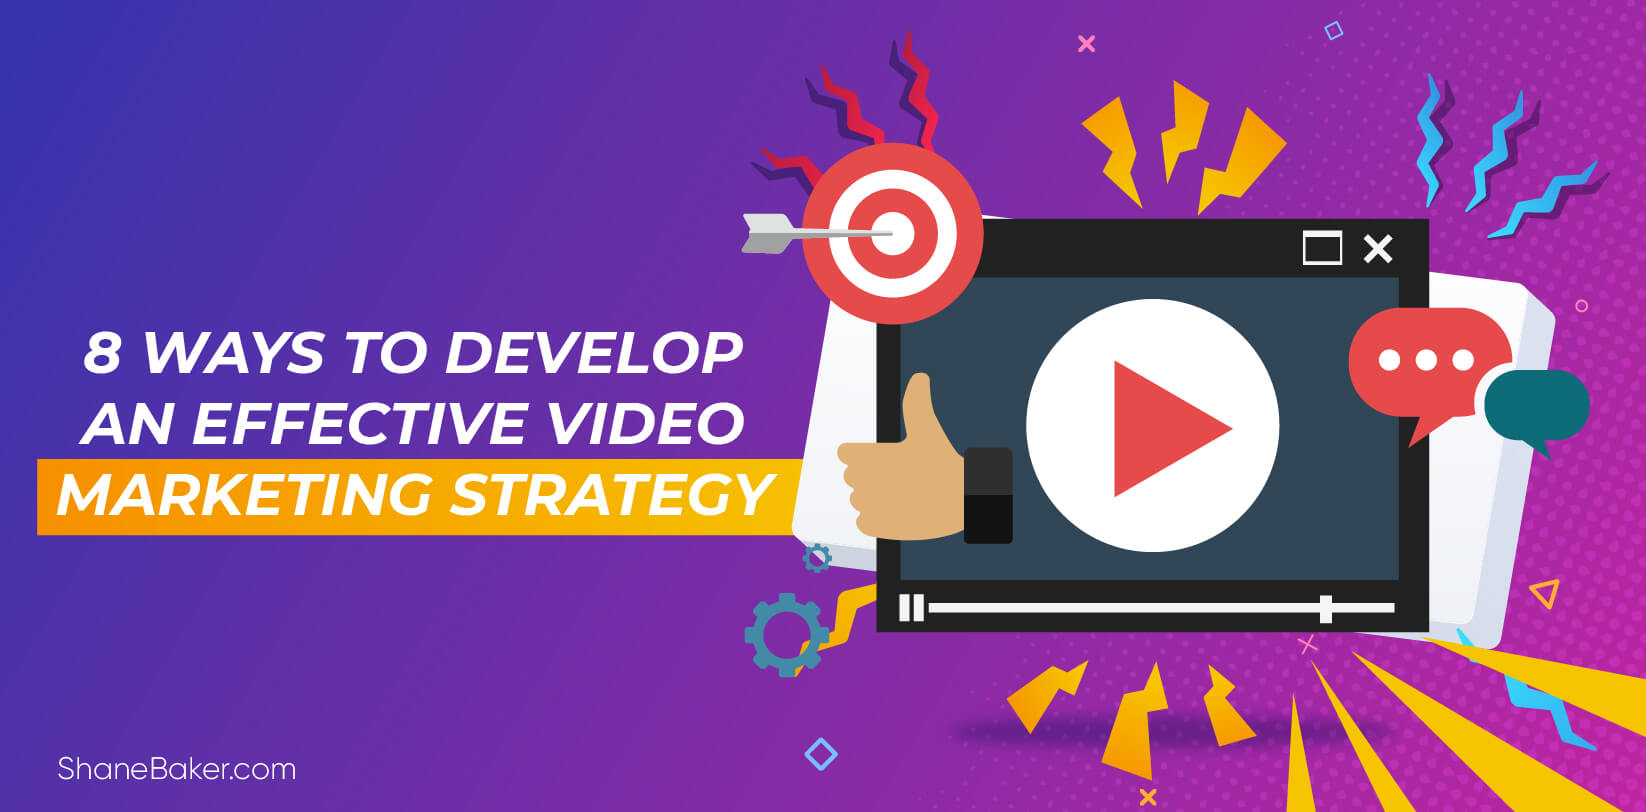 8 ways to develop an effective video marketing strategy